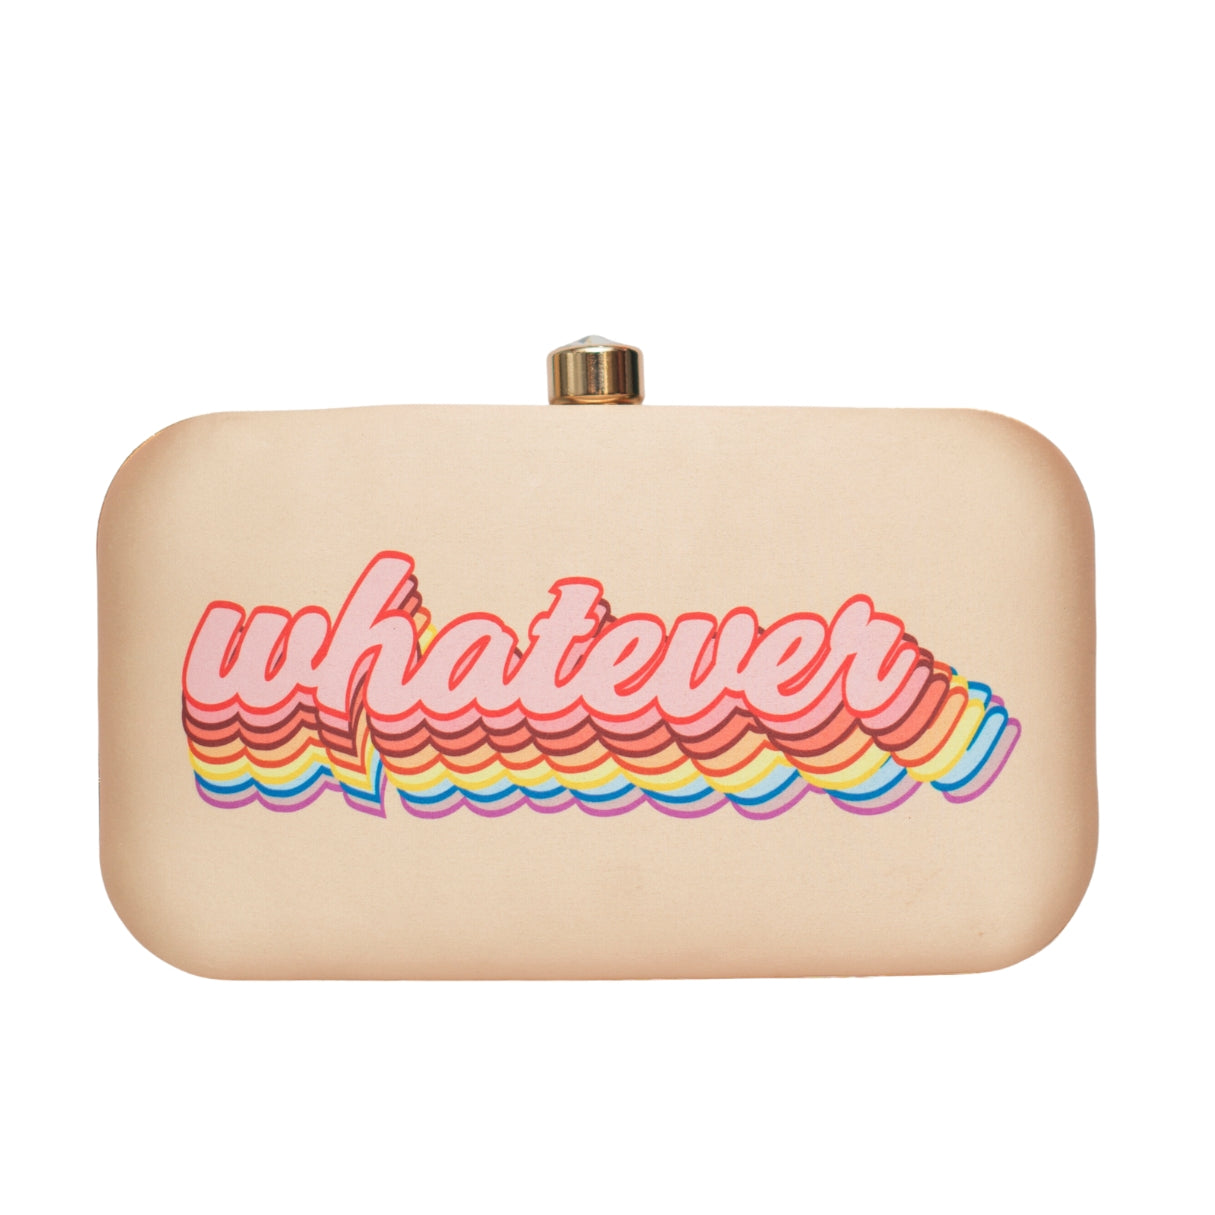 Whatever Theme Printed Clutch